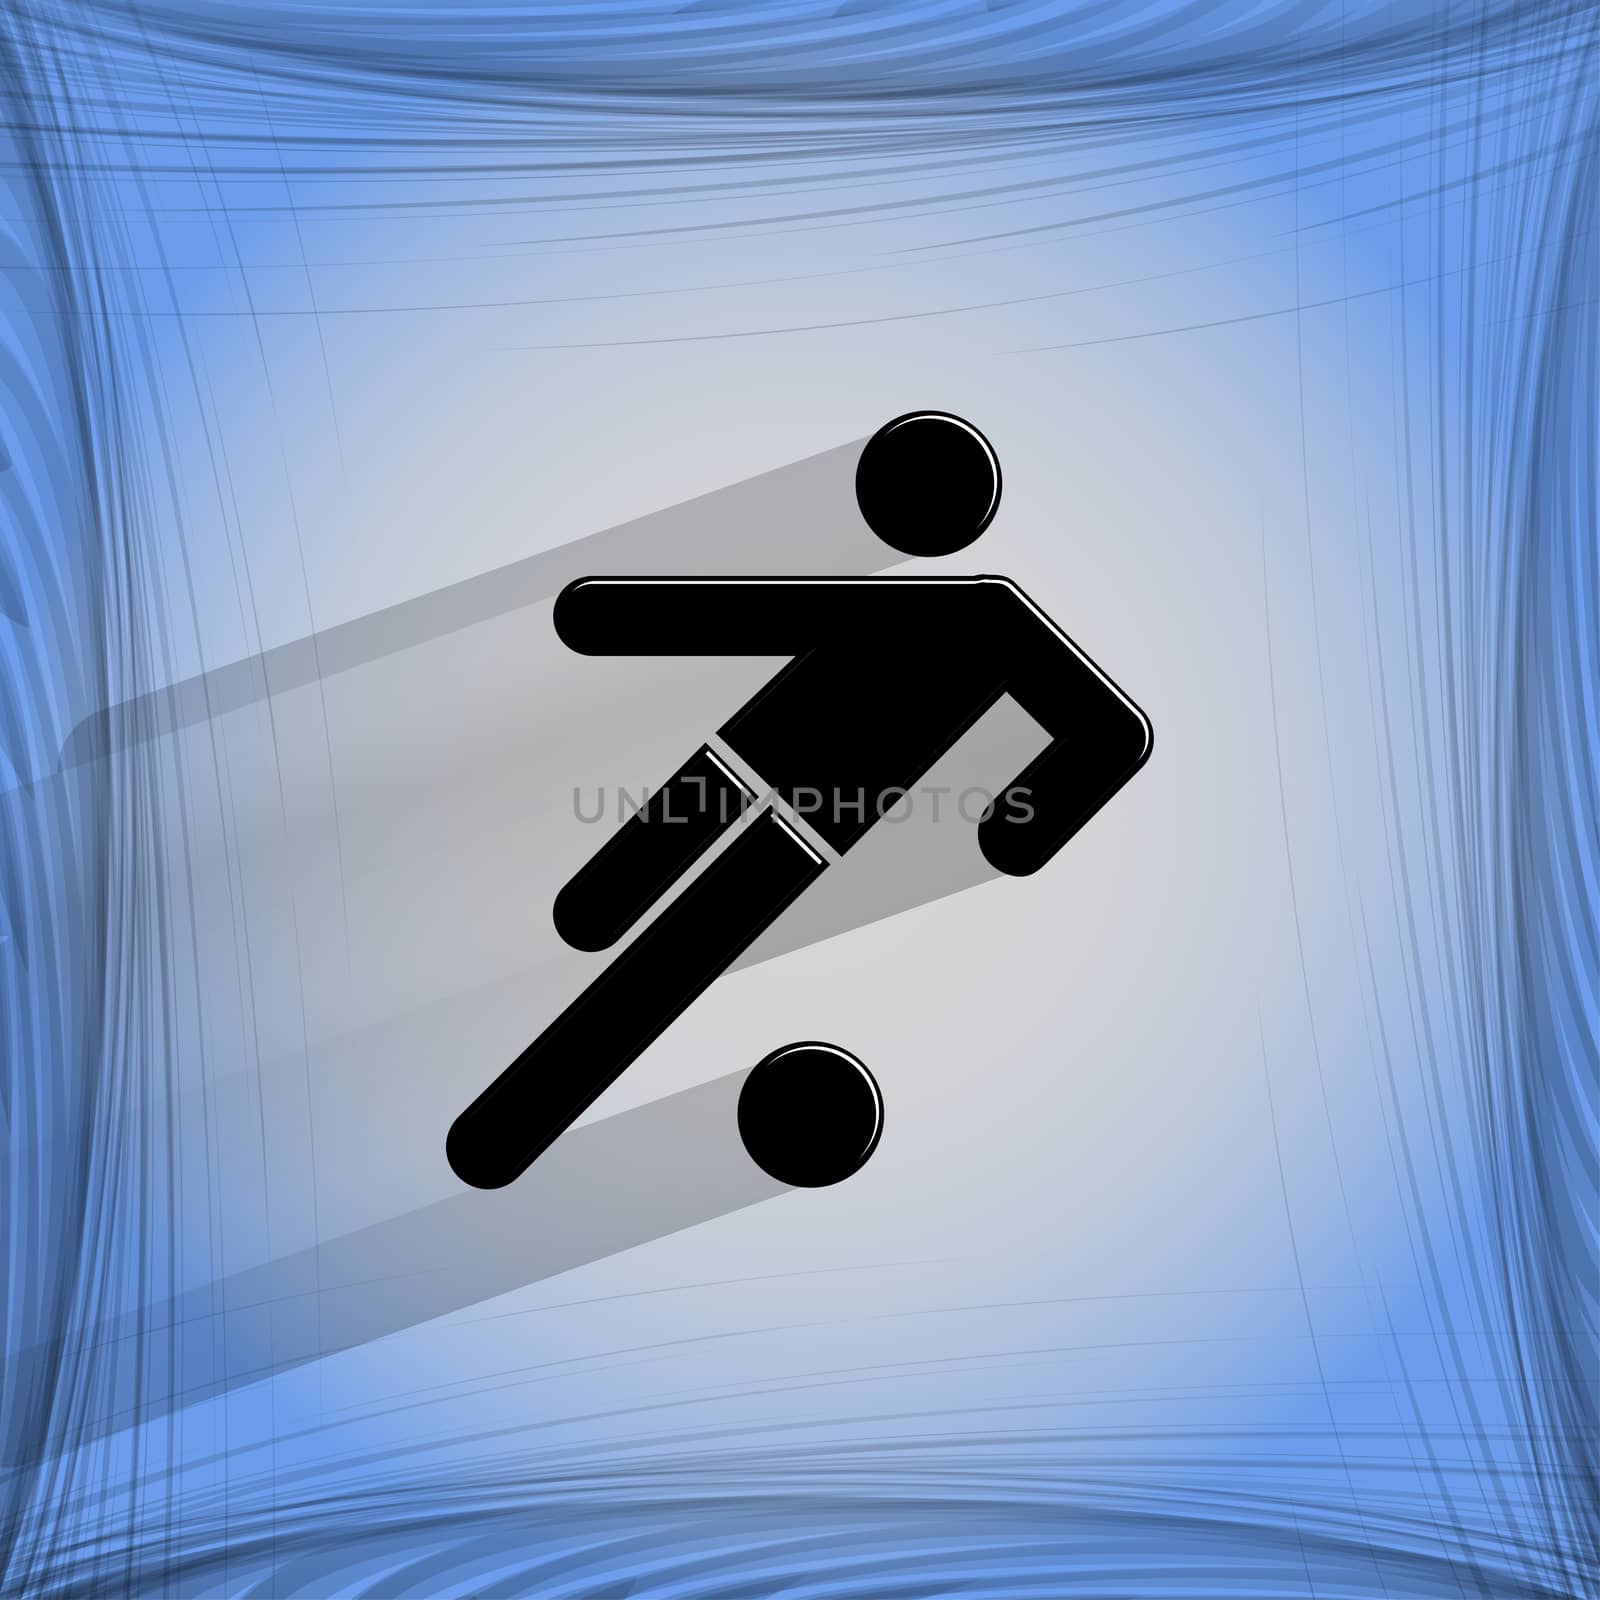 football player. Flat modern web button   on a flat geometric abstract background  . 